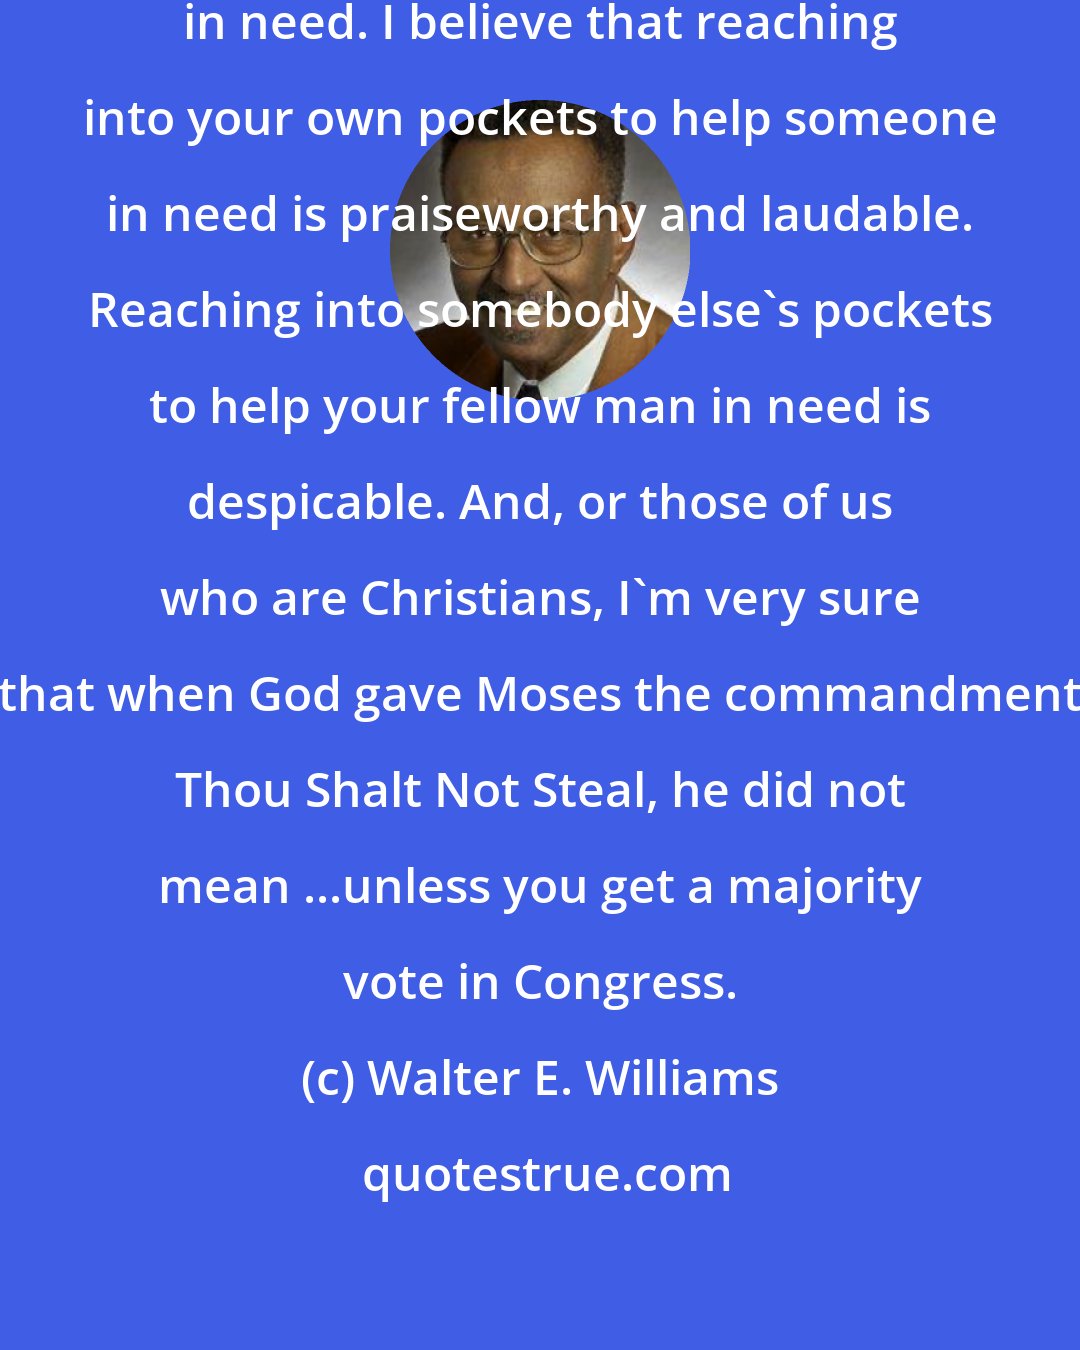 Walter E. Williams: I believe in helping our fellow man in need. I believe that reaching into your own pockets to help someone in need is praiseworthy and laudable. Reaching into somebody else's pockets to help your fellow man in need is despicable. And, or those of us who are Christians, I'm very sure that when God gave Moses the commandment Thou Shalt Not Steal, he did not mean ...unless you get a majority vote in Congress.